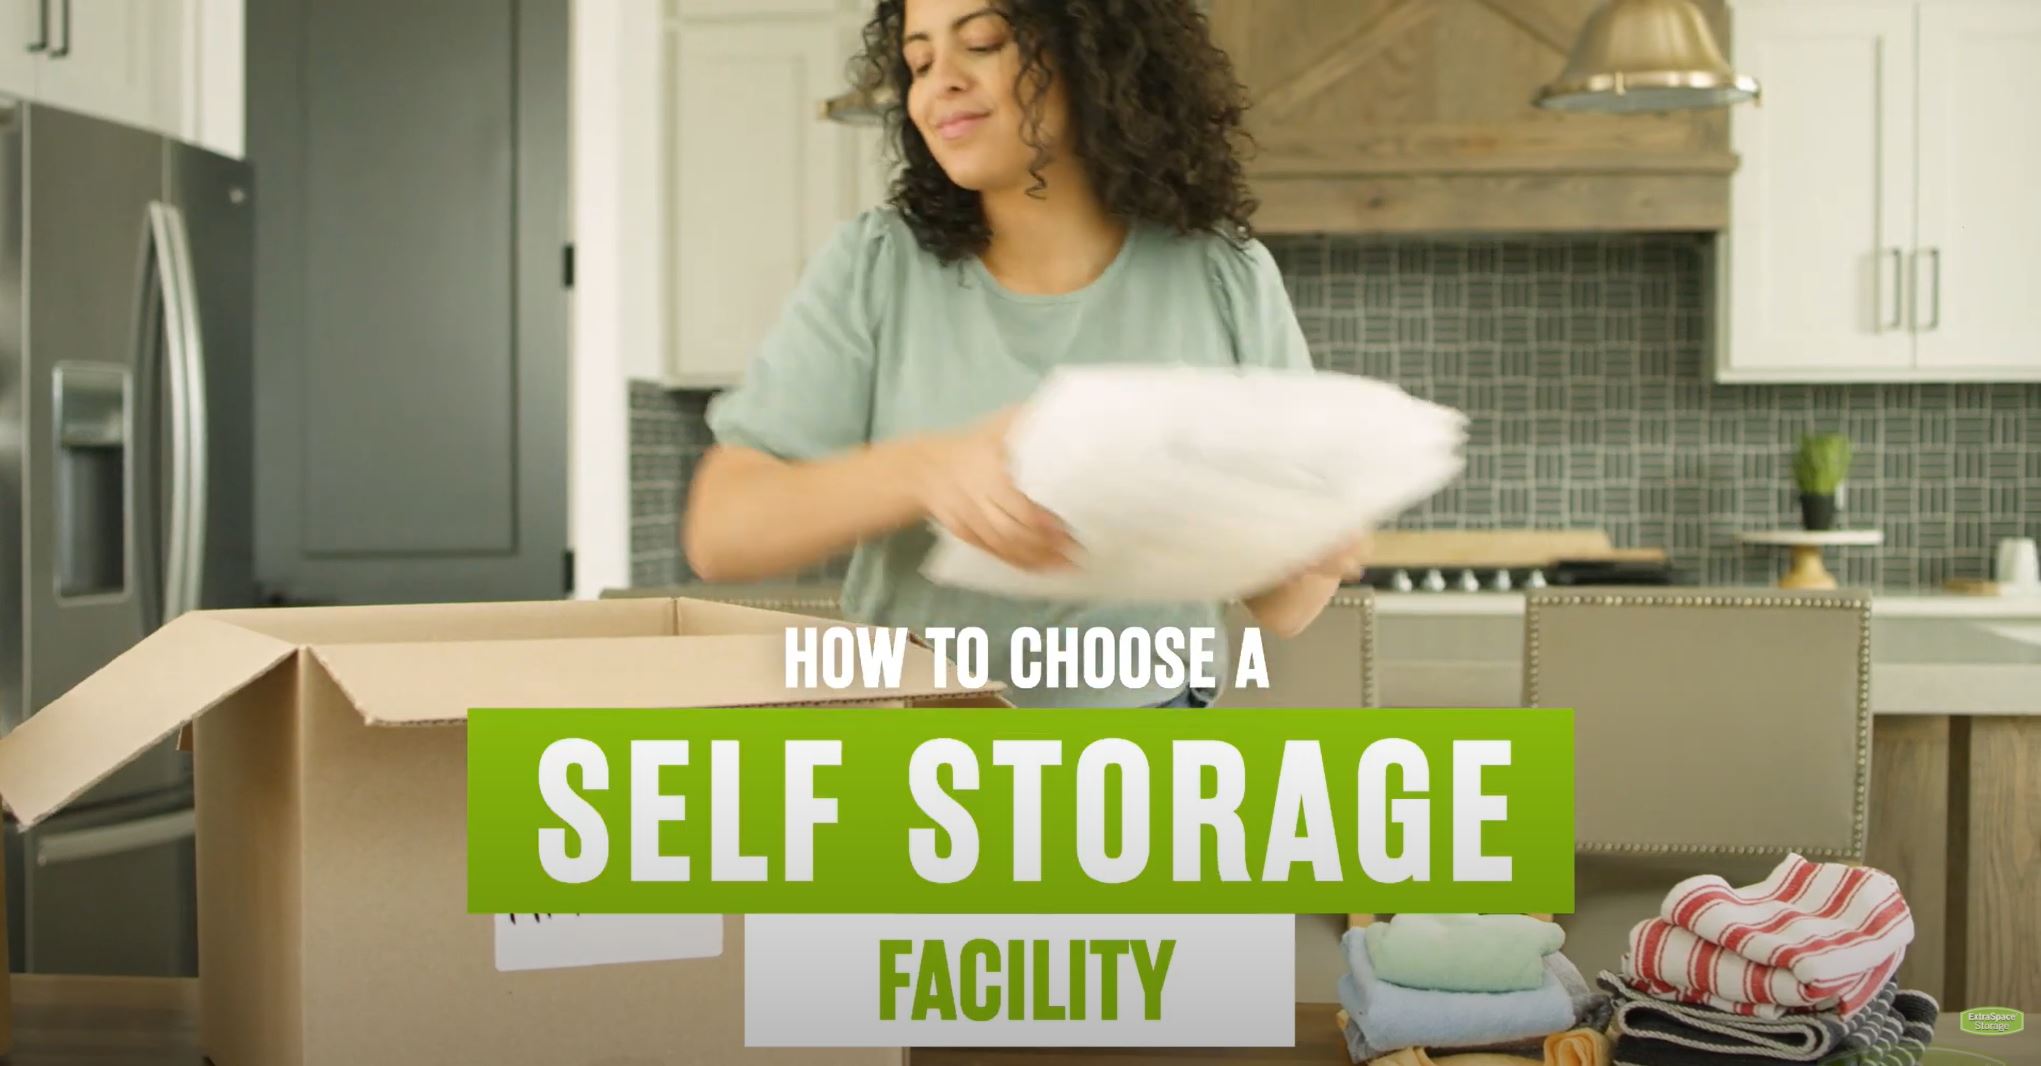 https://images.ctfassets.net/fynvlmu126fq/3fhaSg5IqedqhWPwR3g5yr/be8421bd3687d5ed26532f4a5a28d6bf/thumbnail-how-to-choose-facility.png